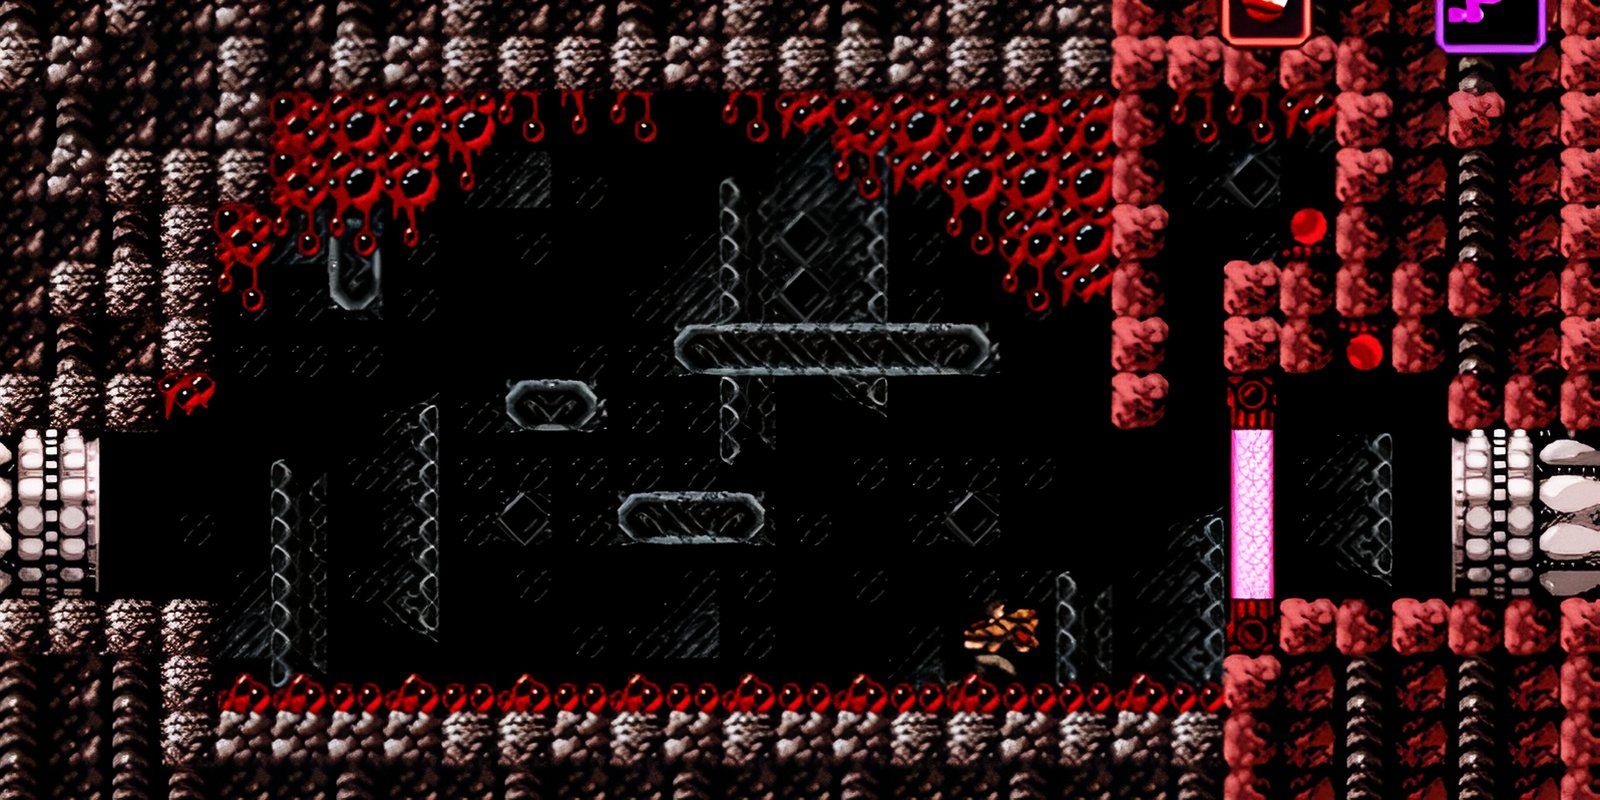 trace from axiom verge running through an area